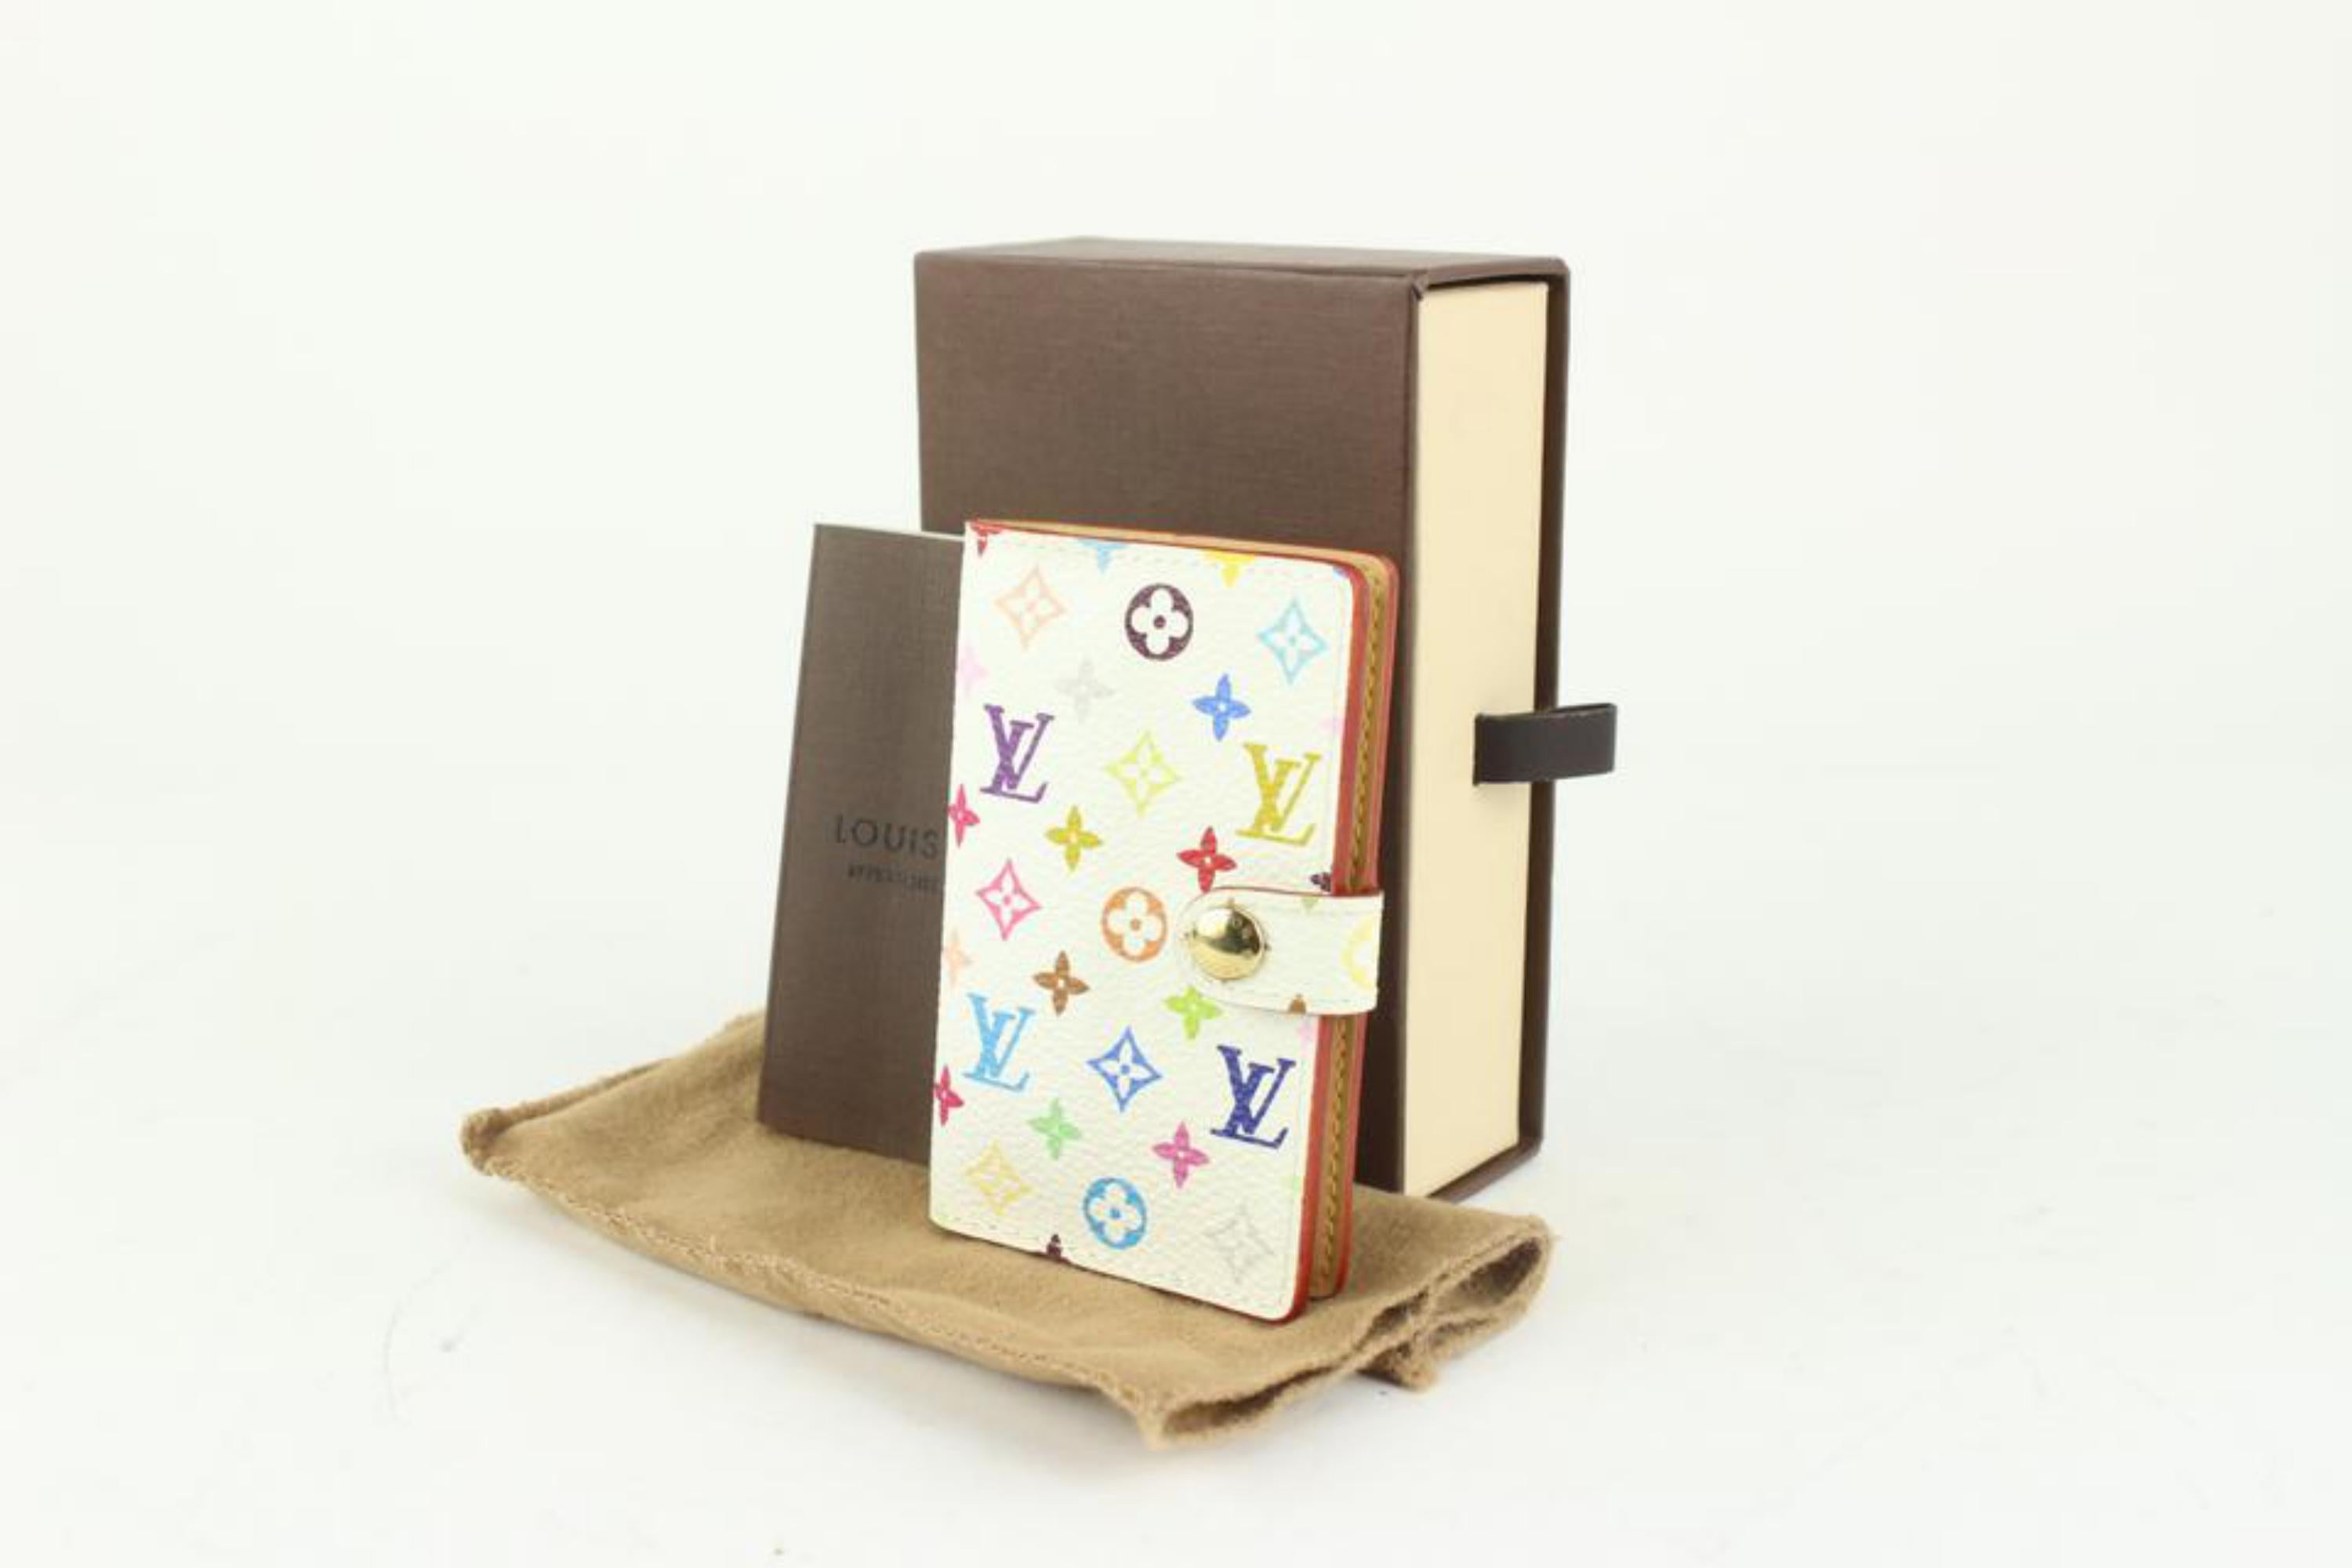 Louis Vuitton White Monogram Multicolor Mini Card Holder 1217lv3
Date Code/Serial Number: SR1003
Made In: France
Measurements: Length:  2.5